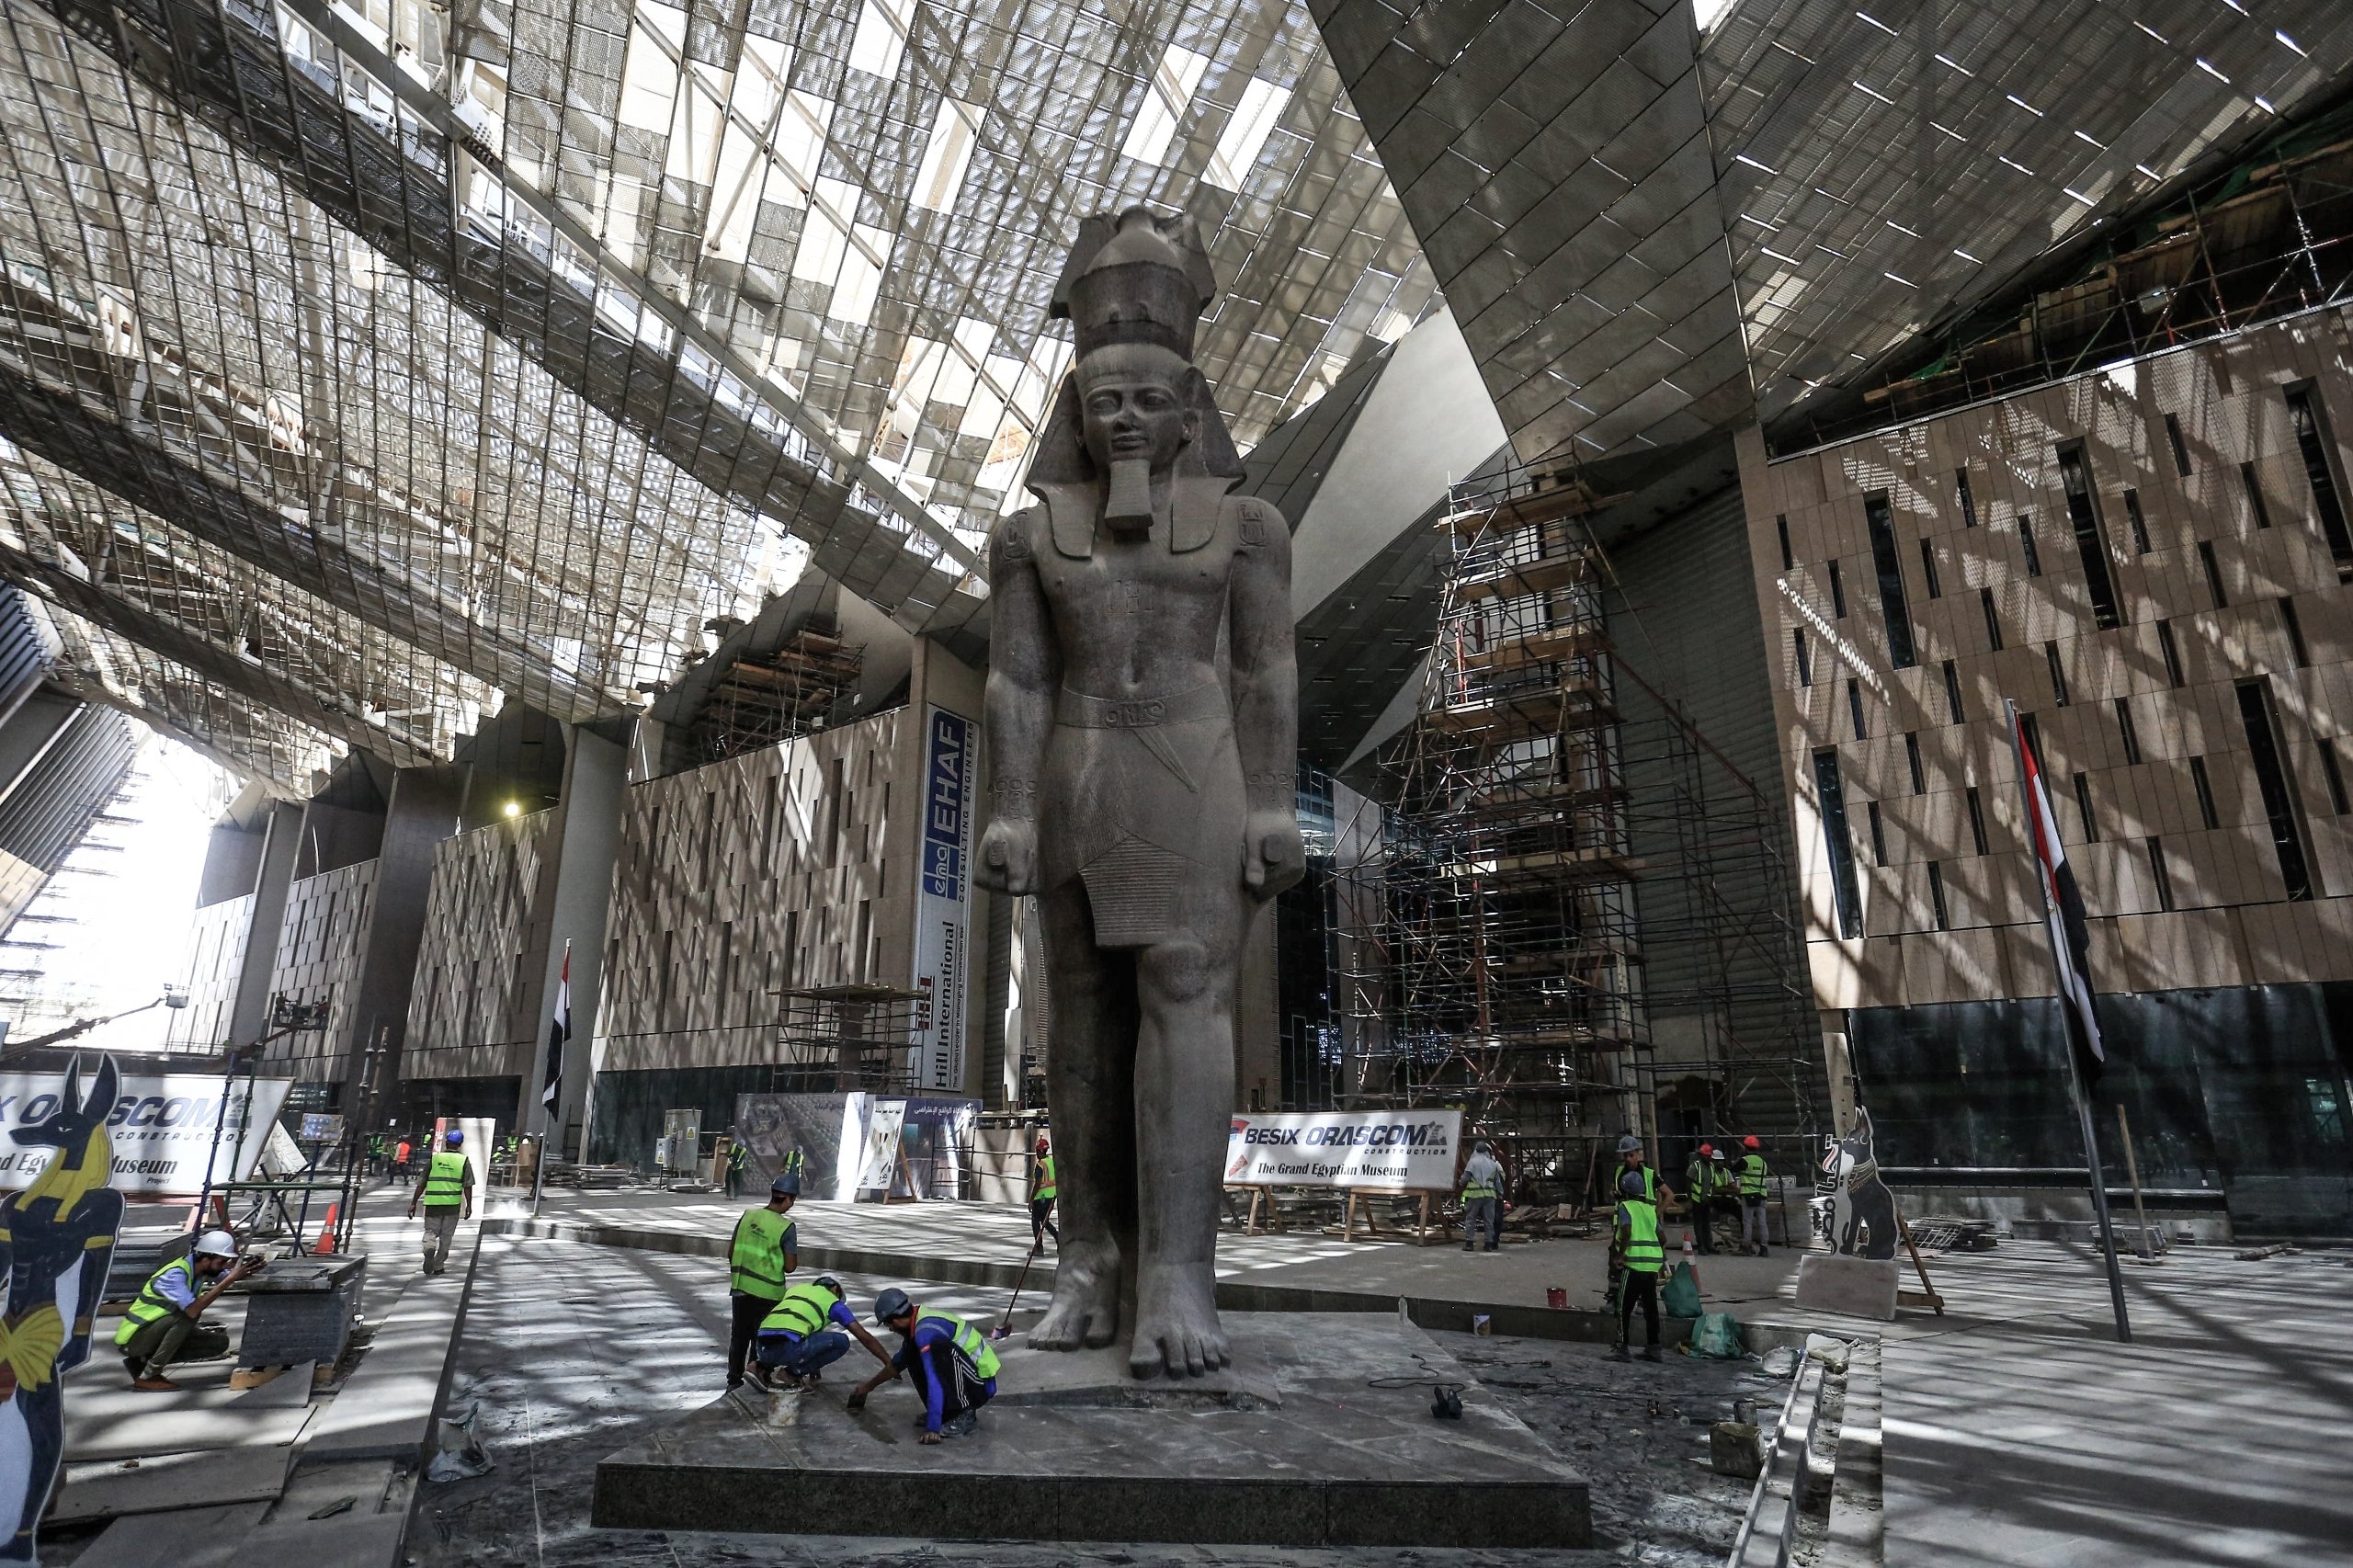 Workers clean the area next to a giant statue of the                Egyptian pharaoh Ramses II in the hall of the Grand                Egyptian Museum in Giza outside Cairo. (DPA)